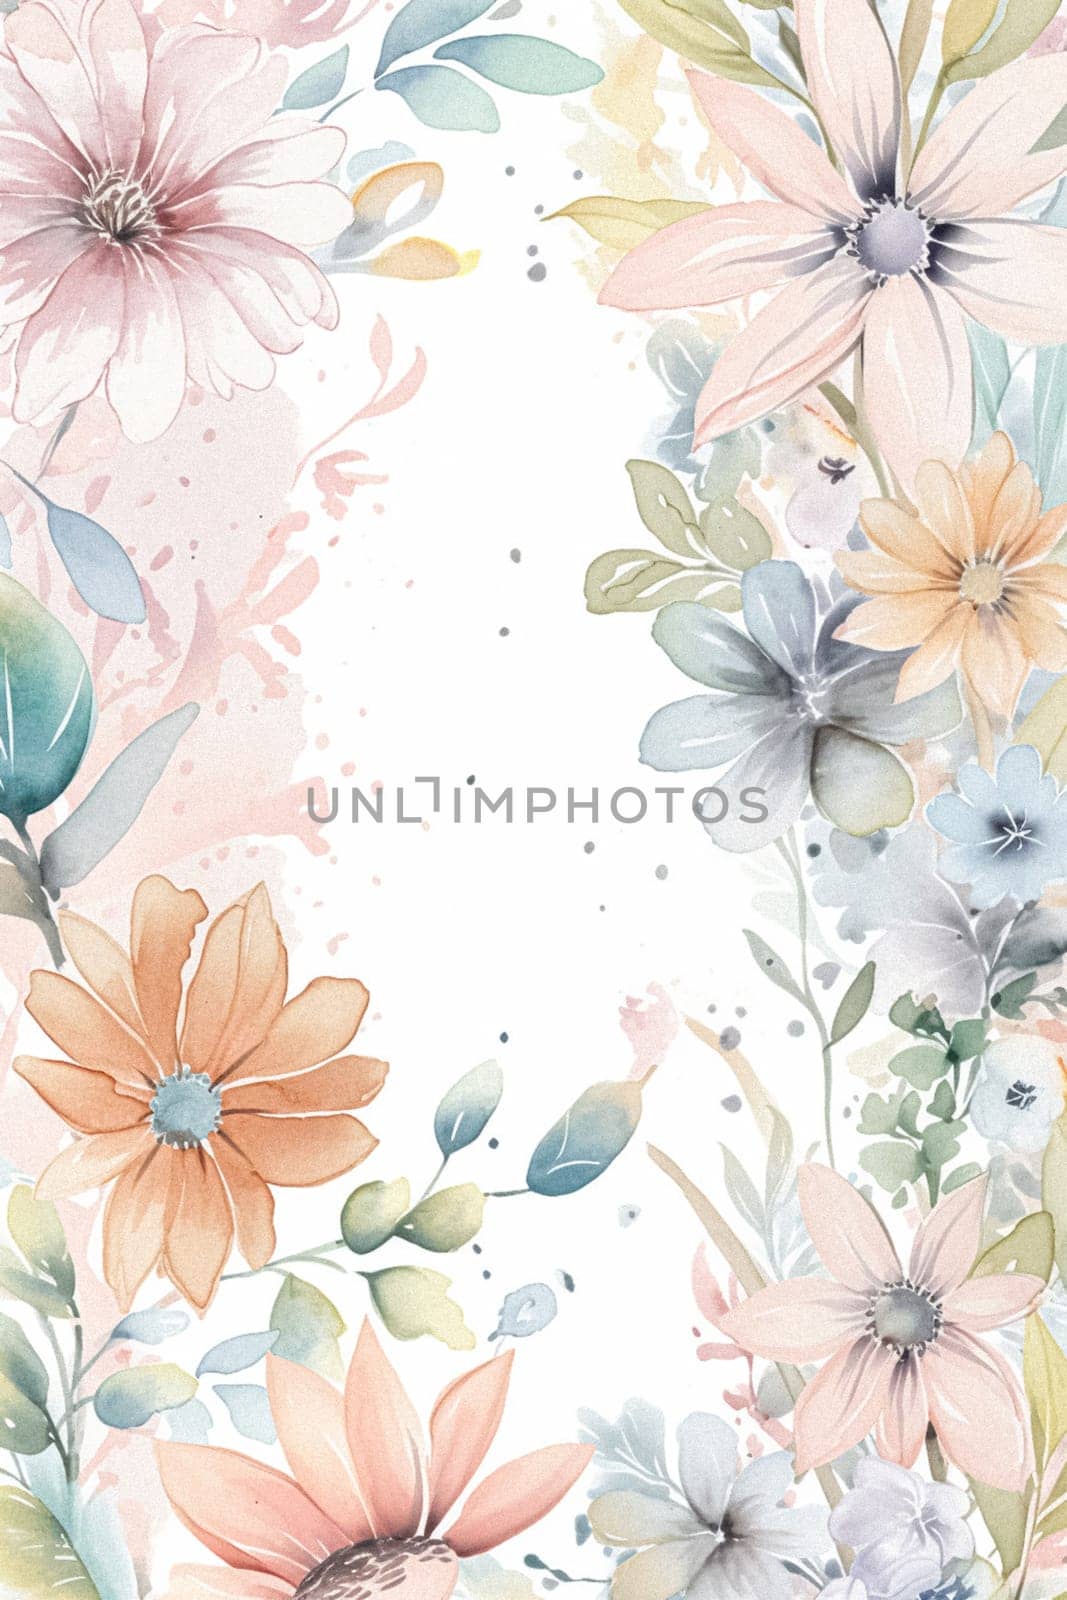 Floral fine art, romantic flowers in soft pastel colours, evoking a sense of tranquility and natural beauty, printable art by Anneleven